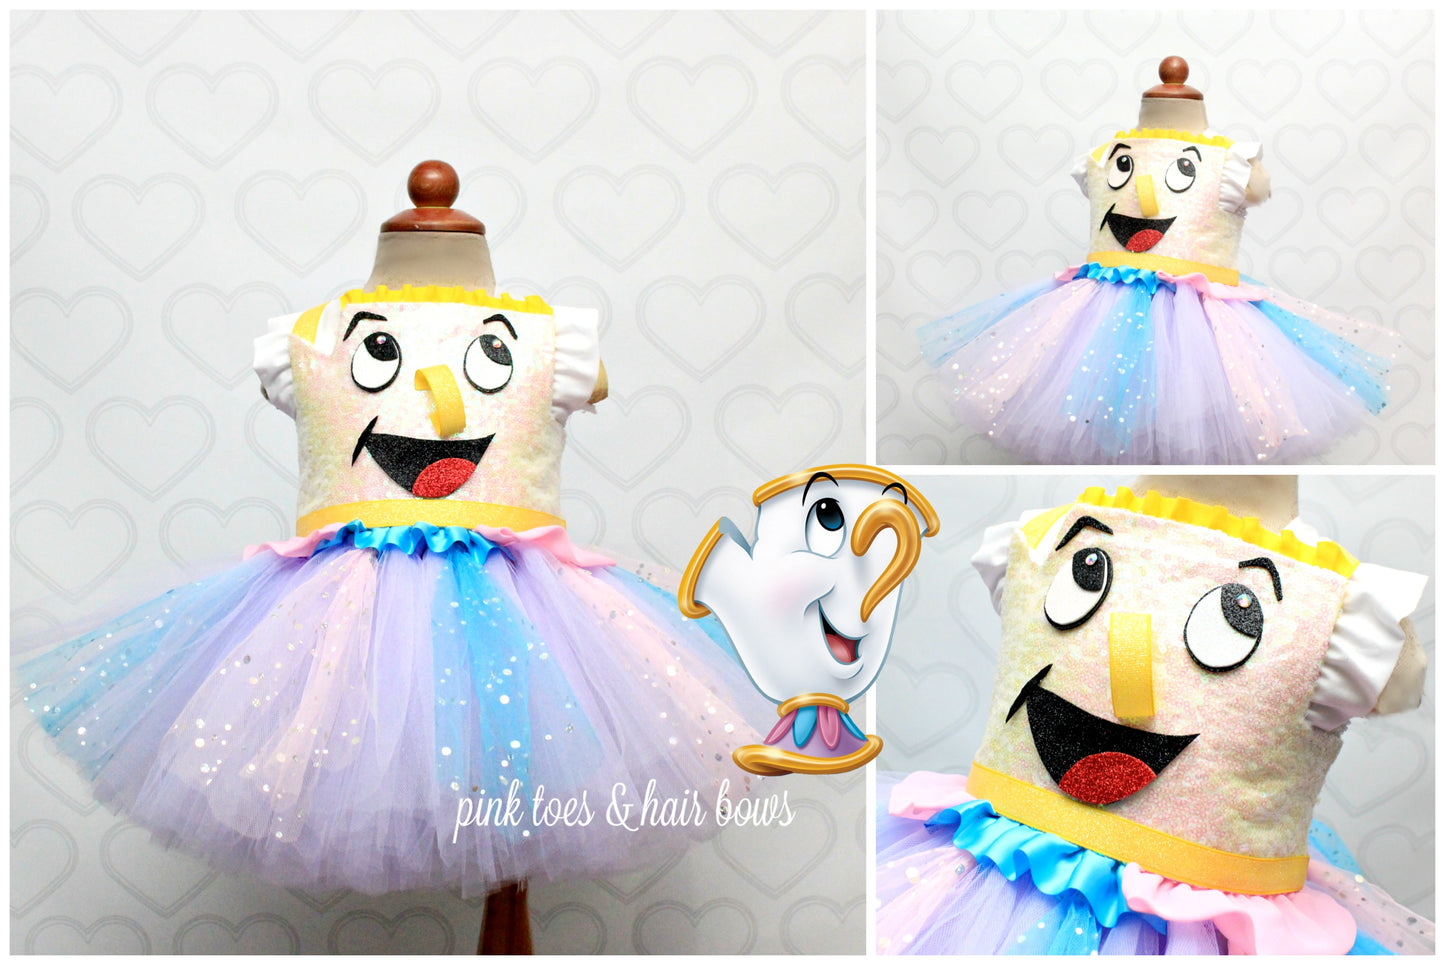 Beauty and the beast Chip tutu Dress-Chip costume-chip tutu dress-Chip dress